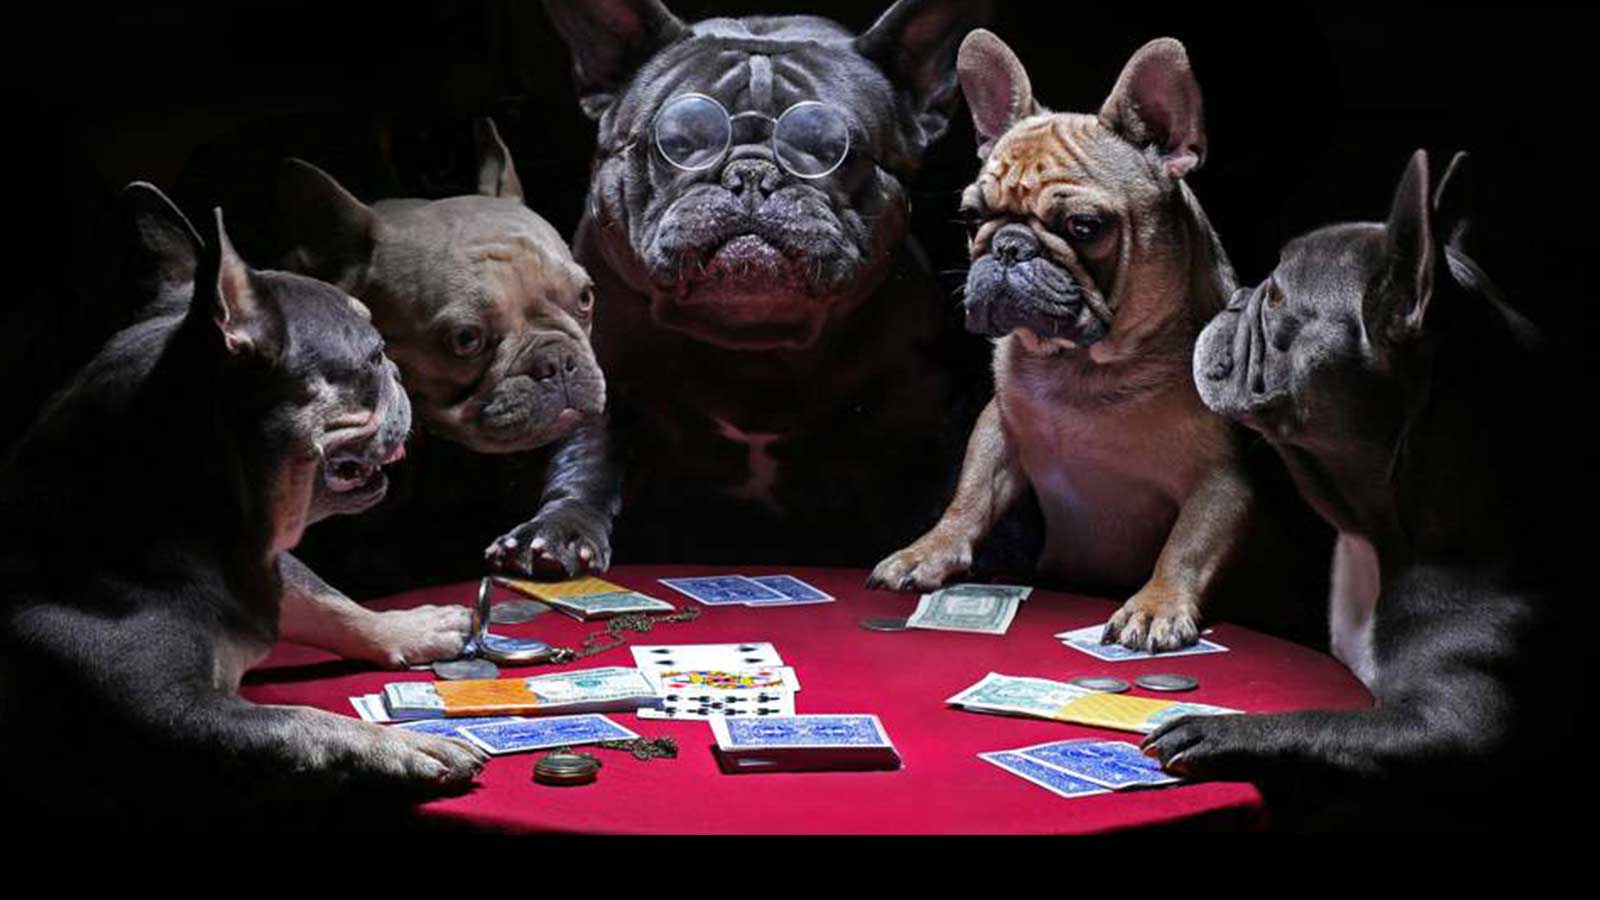 Classic Funny Gambling Photos We Had to Include